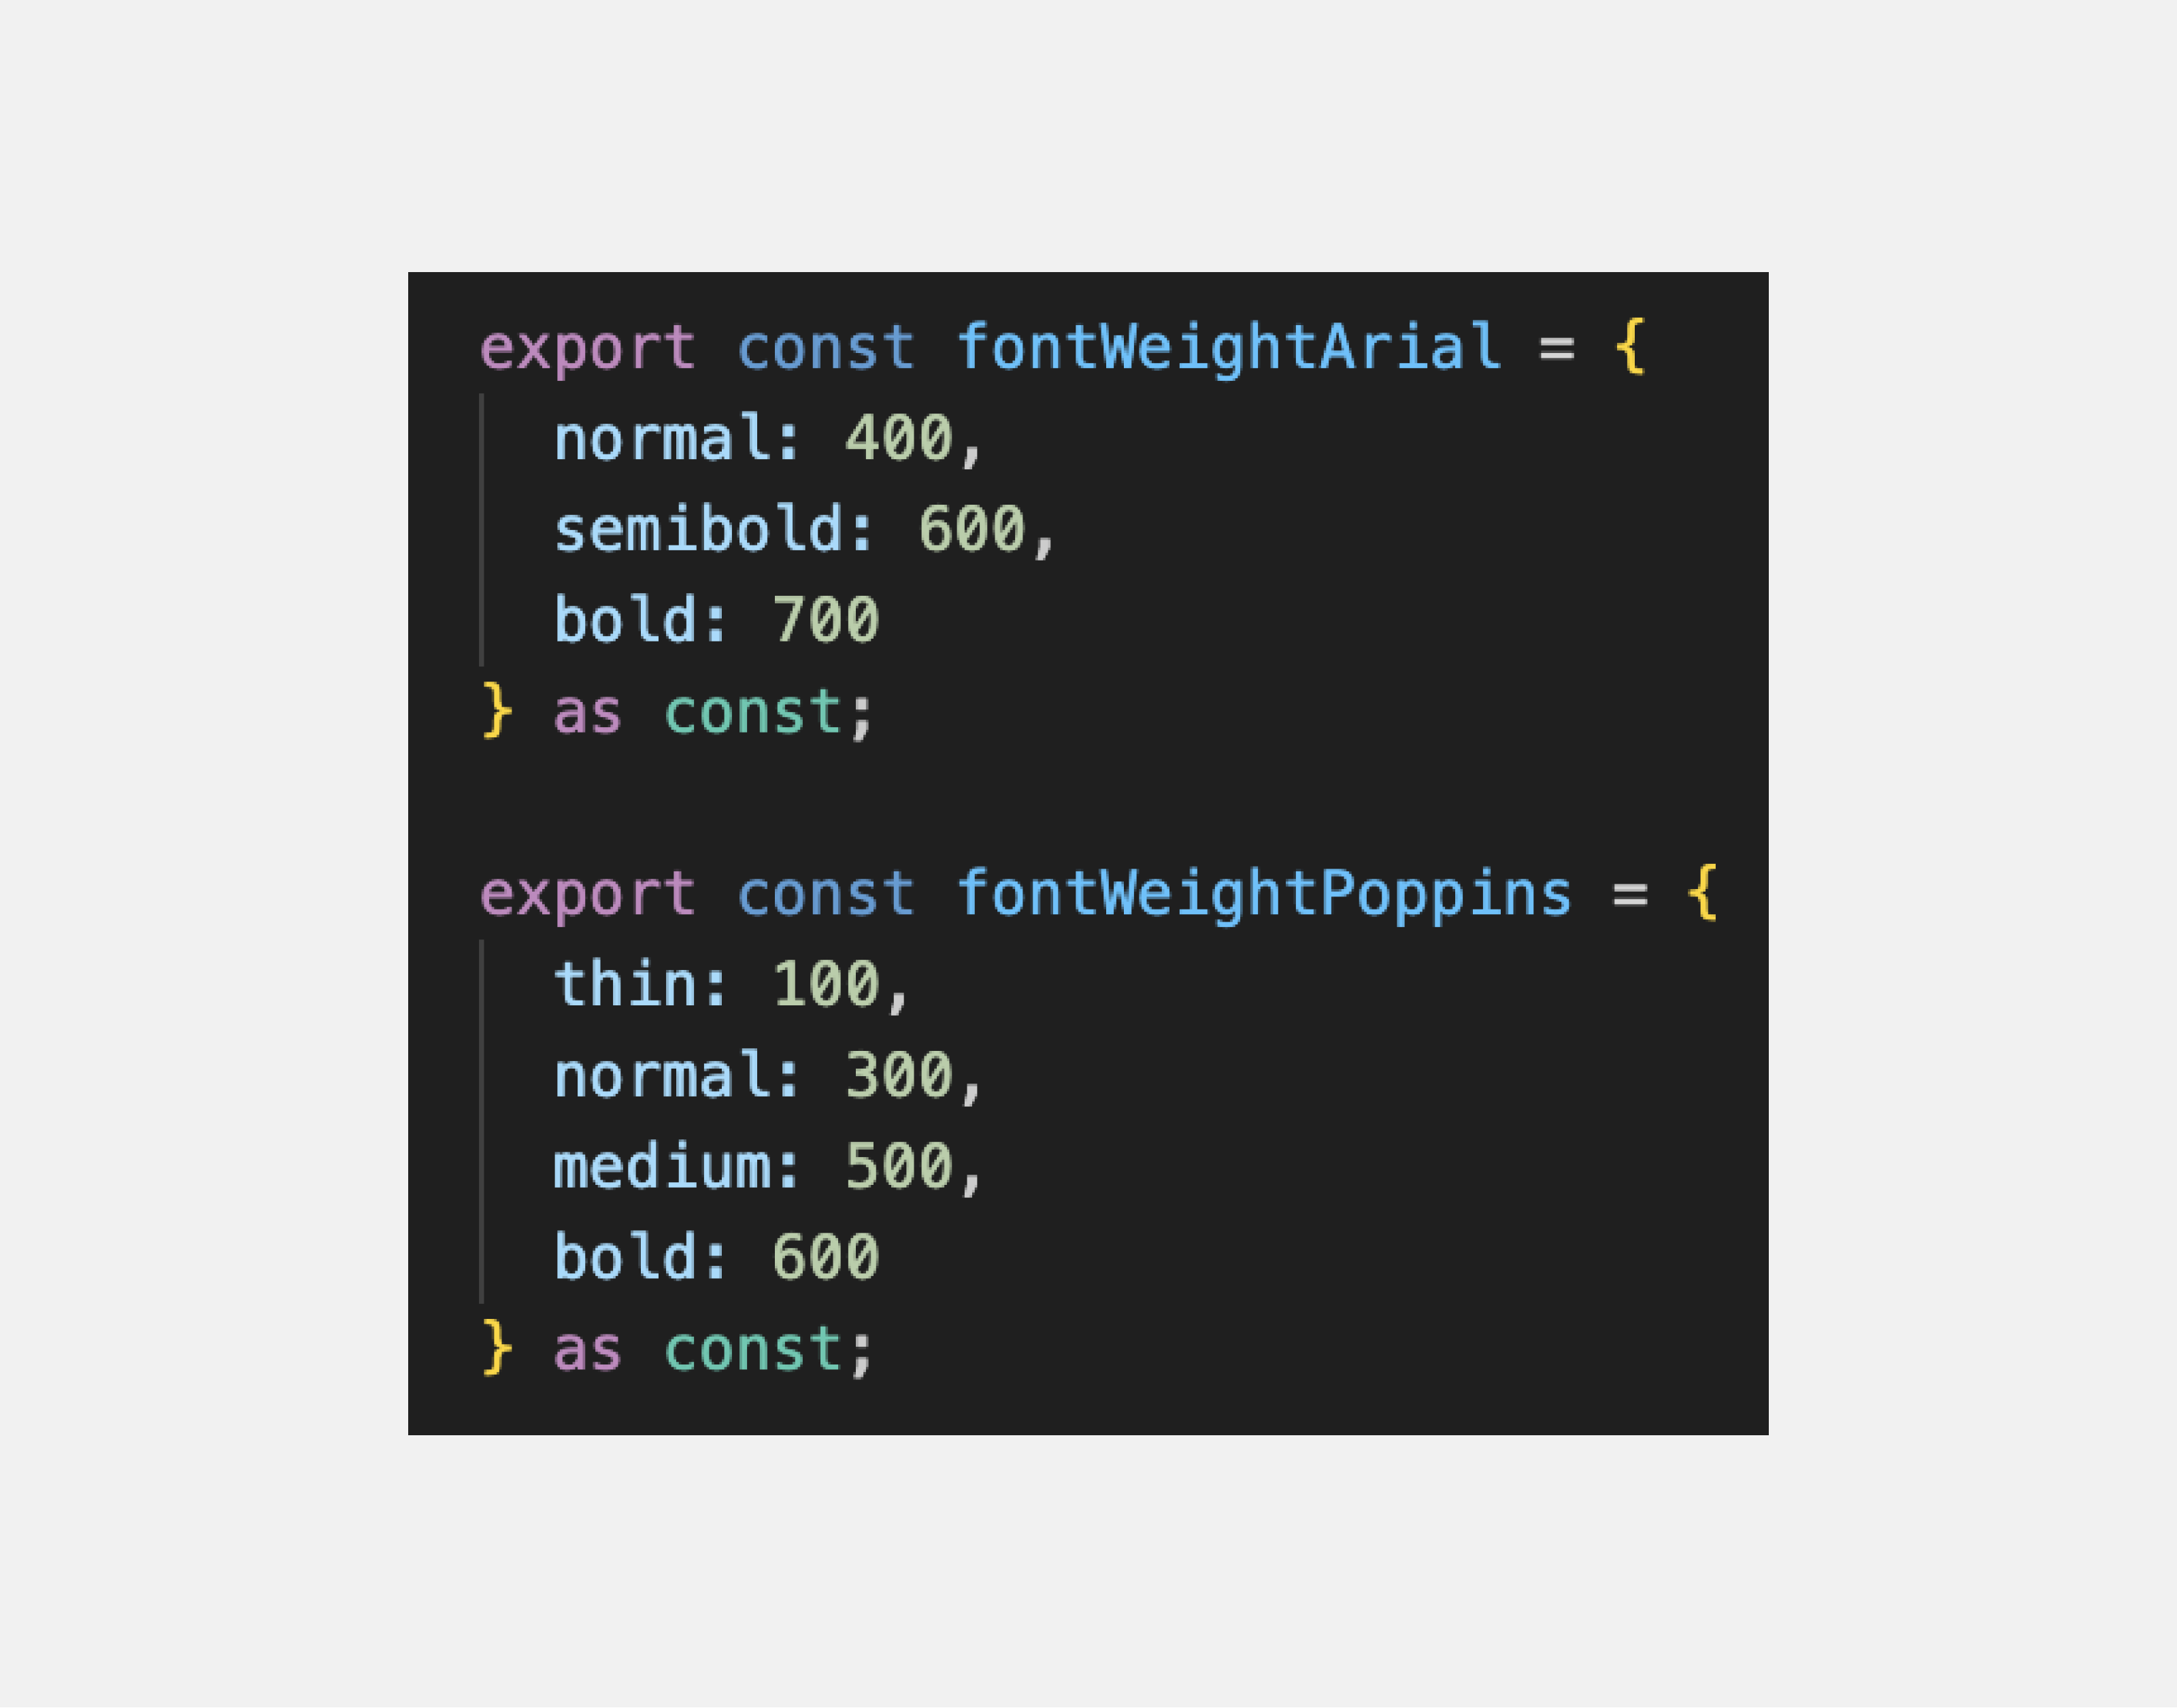 The image shows JavaScript code defined in two variables: fontWeightArial and fontWeightPoppins. The fontWeightArial variable contains three font weights for the Arial font: normal (400), semi-bold (600), bold (700). The fontWeightPoppins variable contains four font weights for the Poppins font: thin (100), normal (300), medium (500), bold (600).